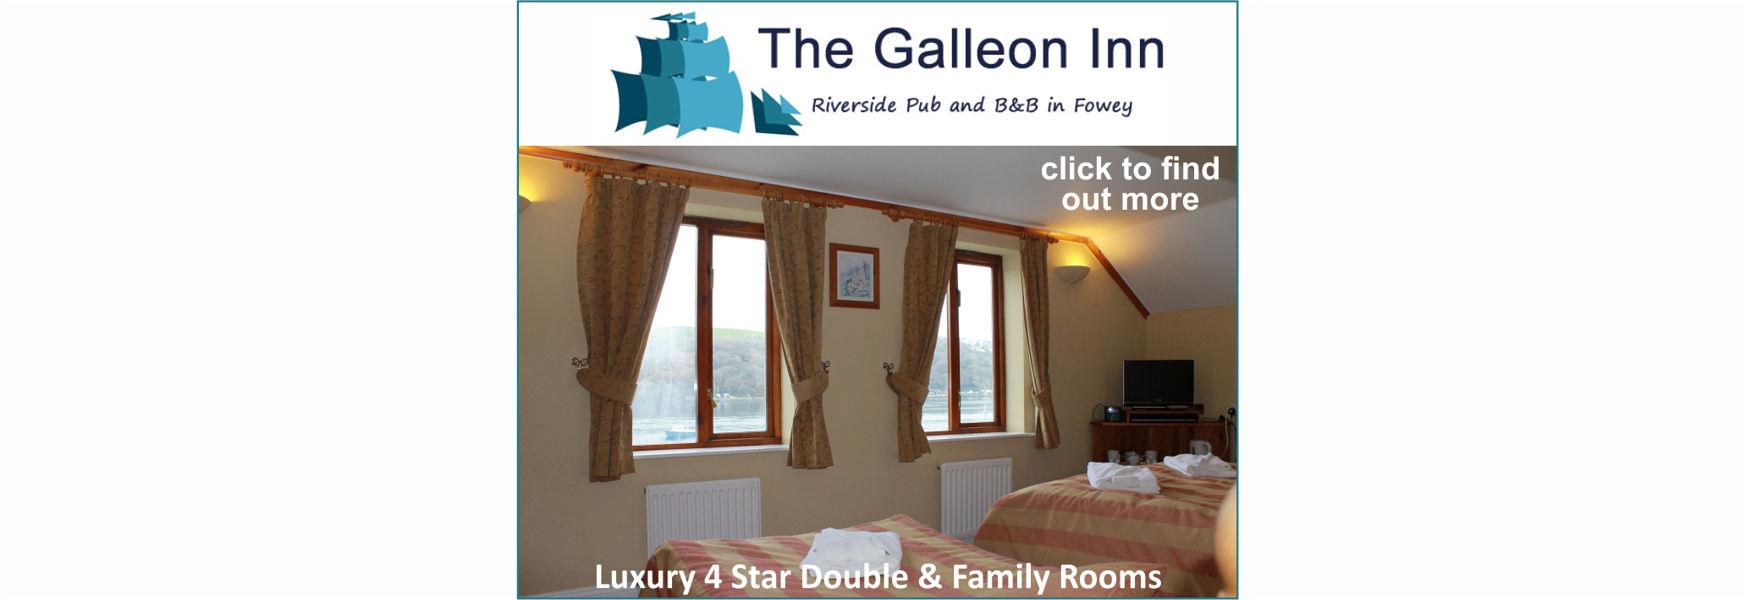 The Galleon Inn - Luxury 4 Star Double & Family Rooms - click to find out more